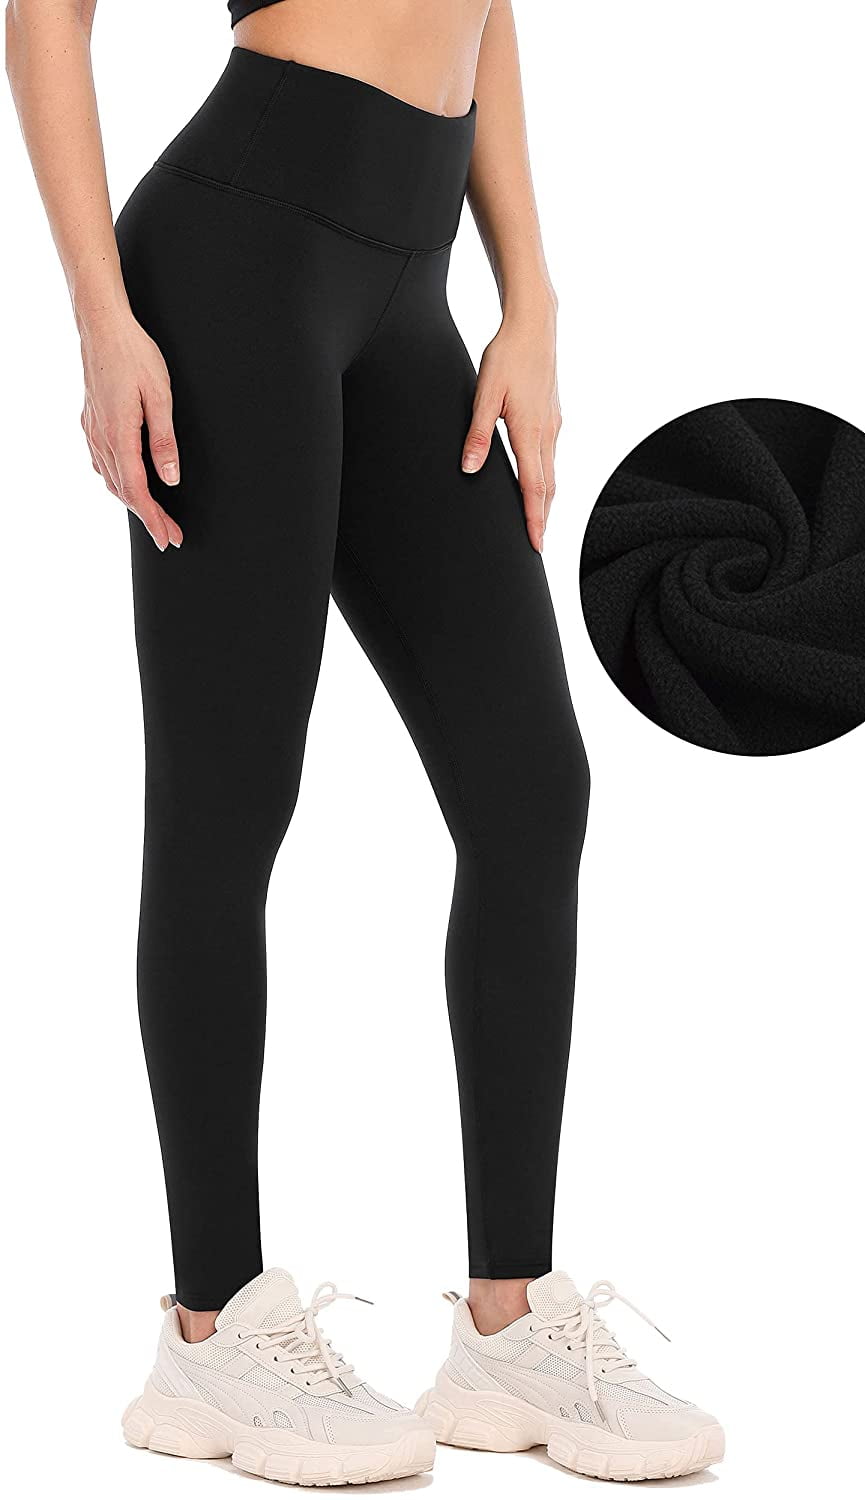 Yoga Pants for Women High Waisted Fleece Lined Leggings for Women Winter Warm Thermal Insulated Leggings Thick Tights